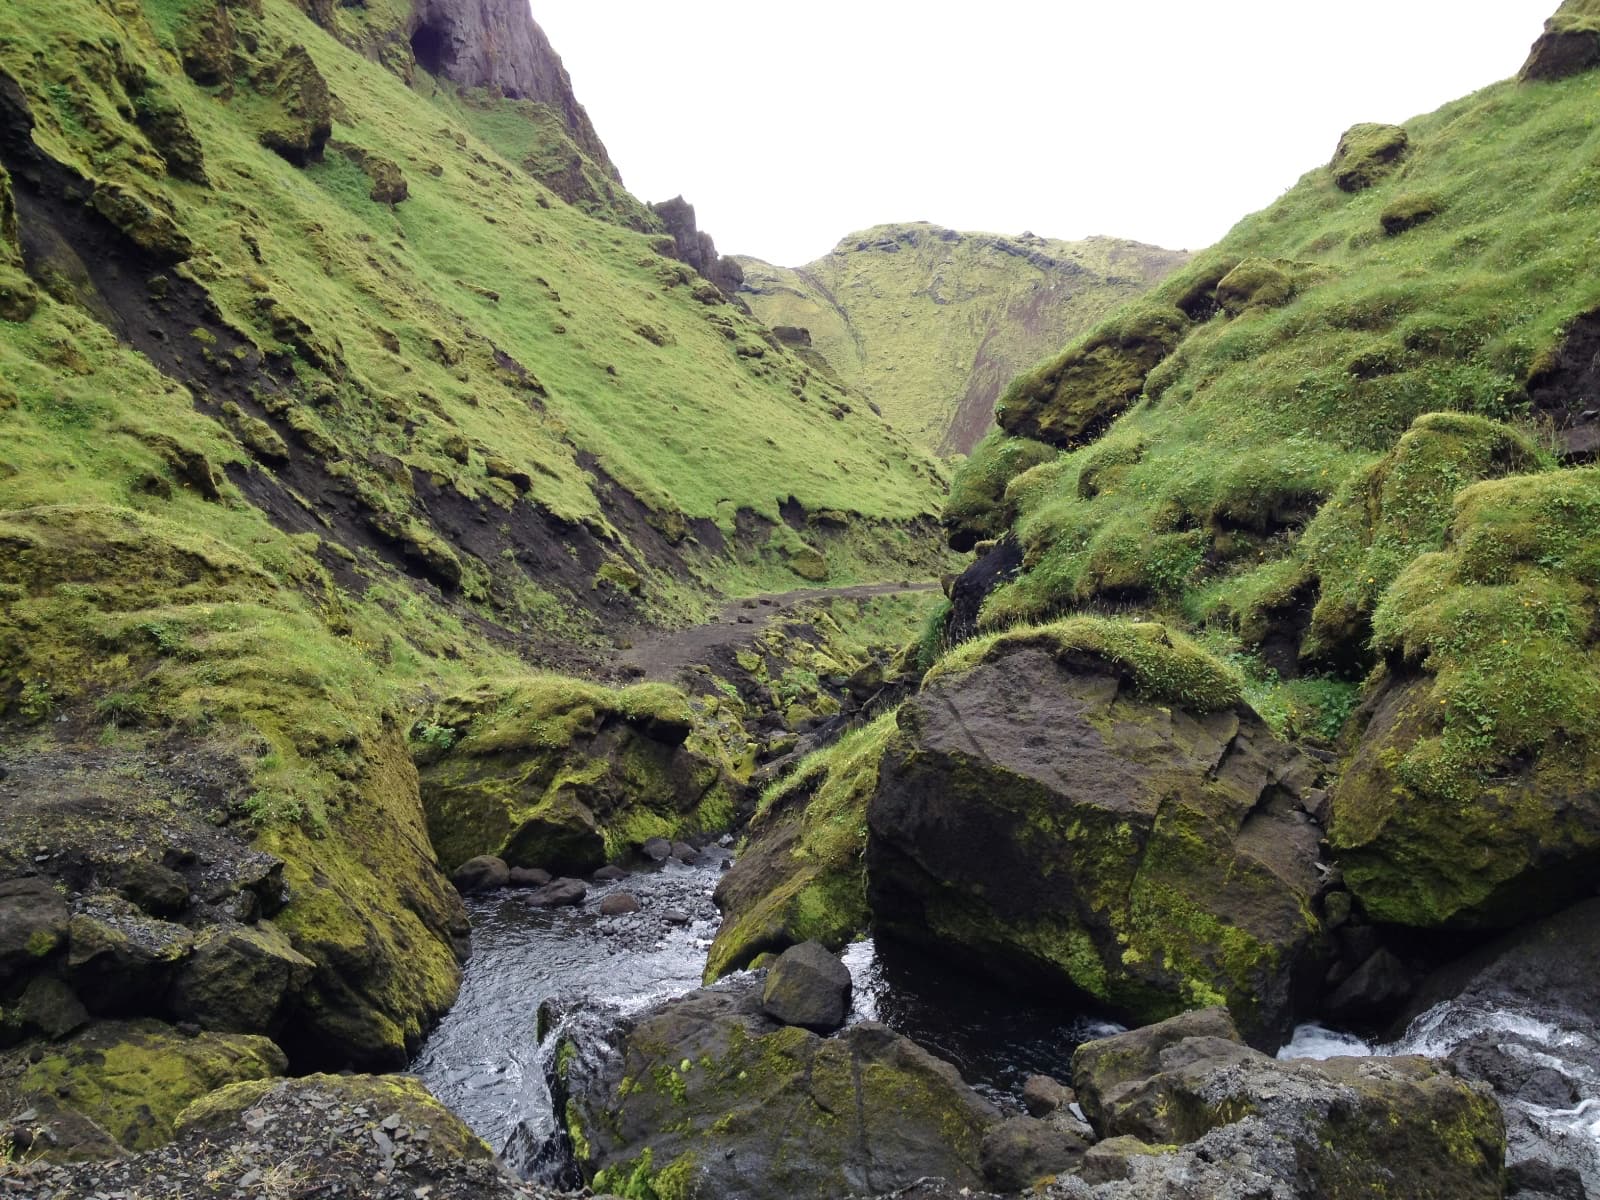 A lush ravine between two rocky hills, with water flowing between them, somewhat close up